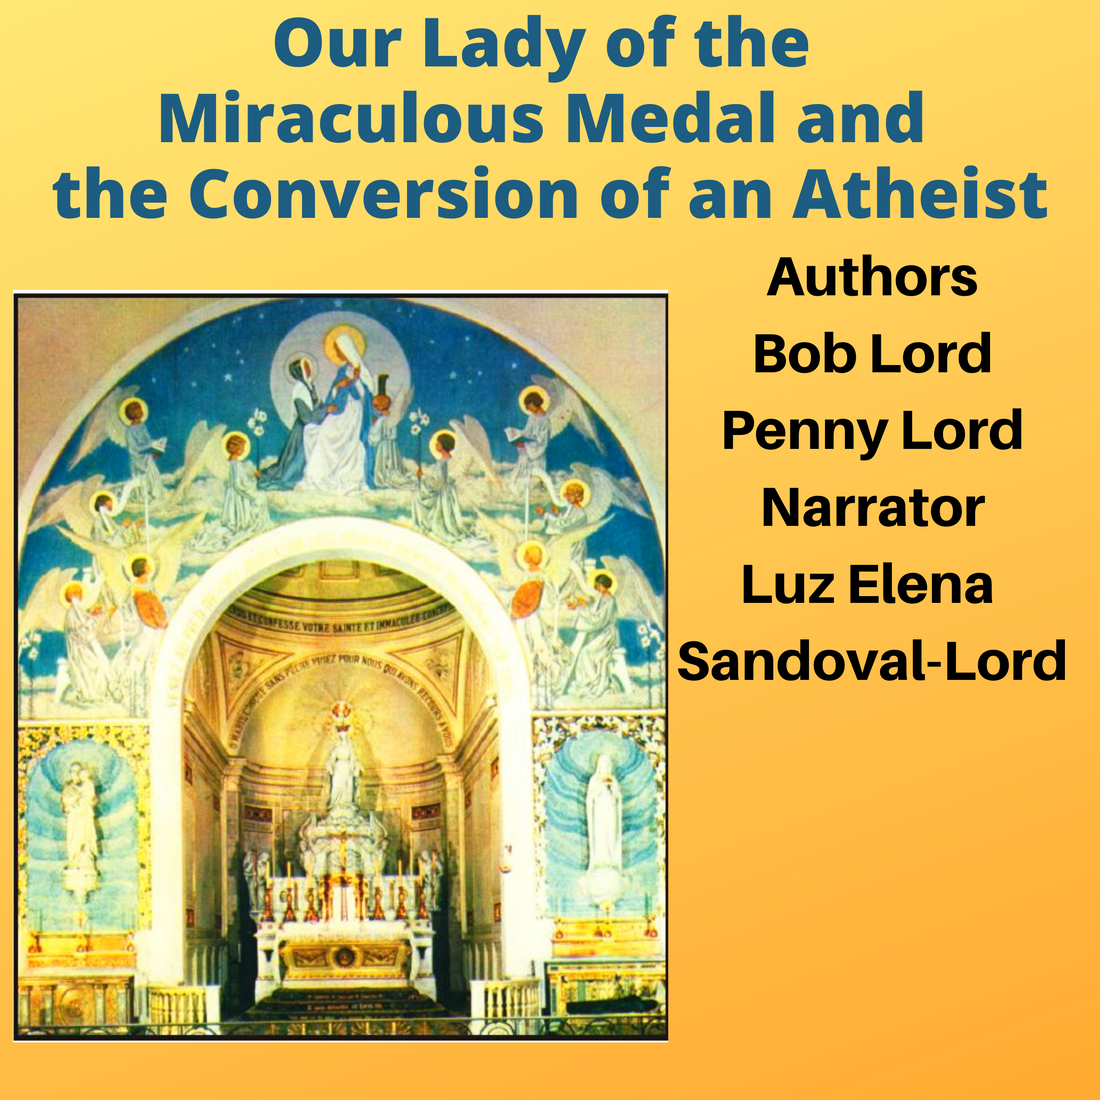 Our Lady of the Miraculous Medal and the Conversion of an Atheist